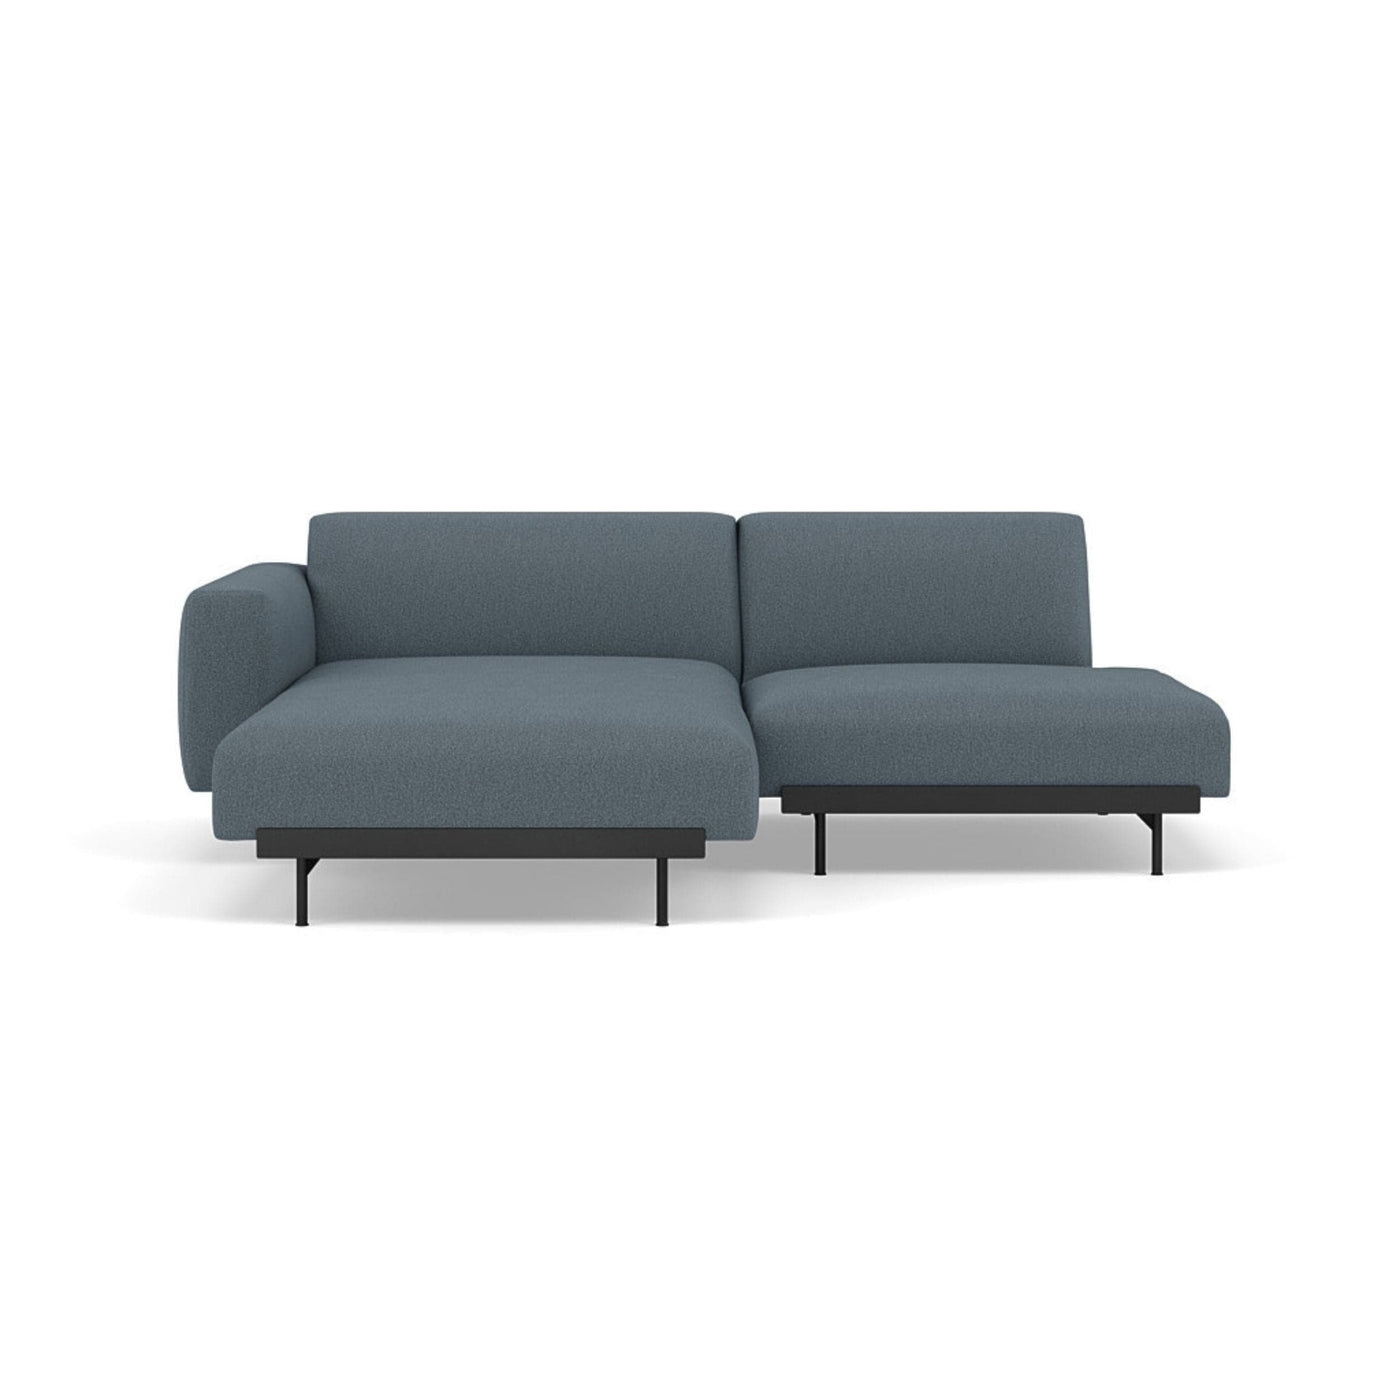 Muuto In Situ Modular 2 Seater Sofa, configuration 6 in clay 1 fabric. Made to order from someday designs #colour_clay-1-blue